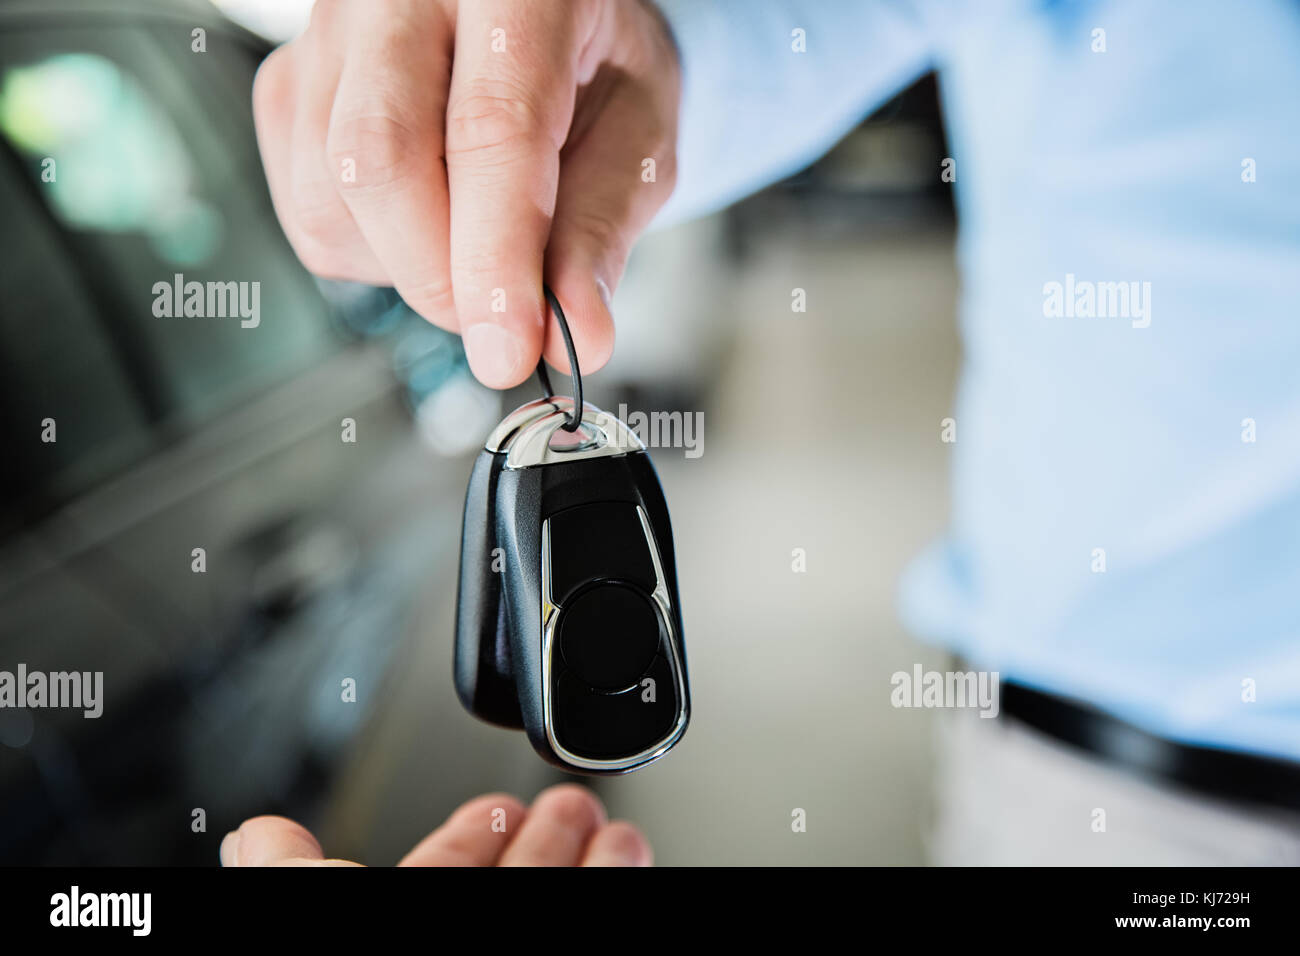 close up photo of male hand giving car keys to female hand, indoors in car dealership Stock Photo